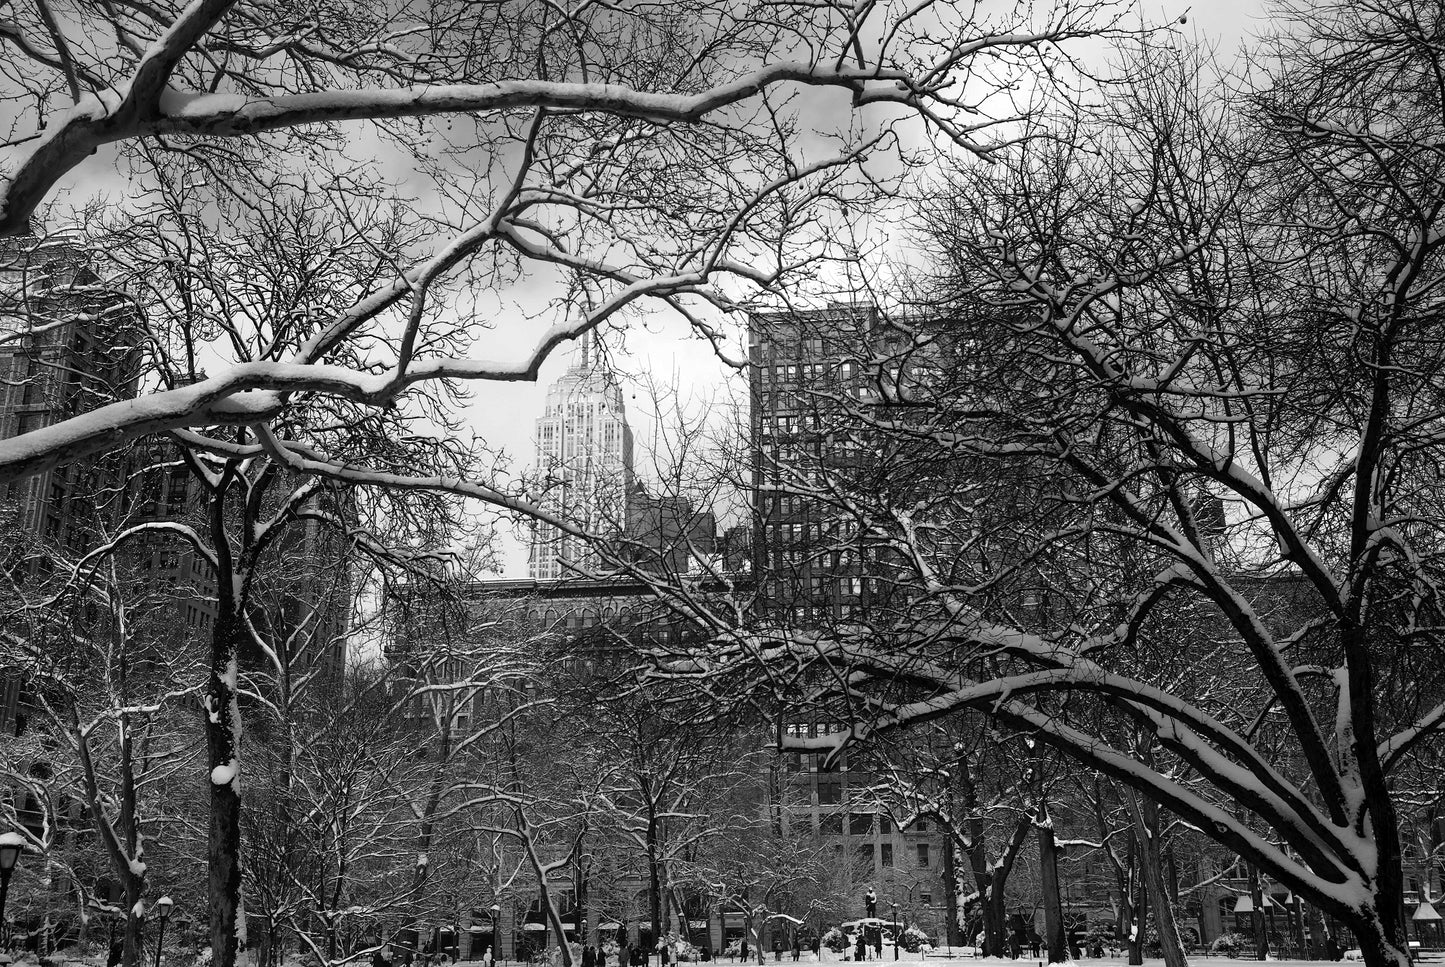 Alessandra Mattanza | DIFFERENCES, New York. The Empire State Building stands in the distance in this winter view from Bryant Park. Available as a photographic print on acrylic glass.